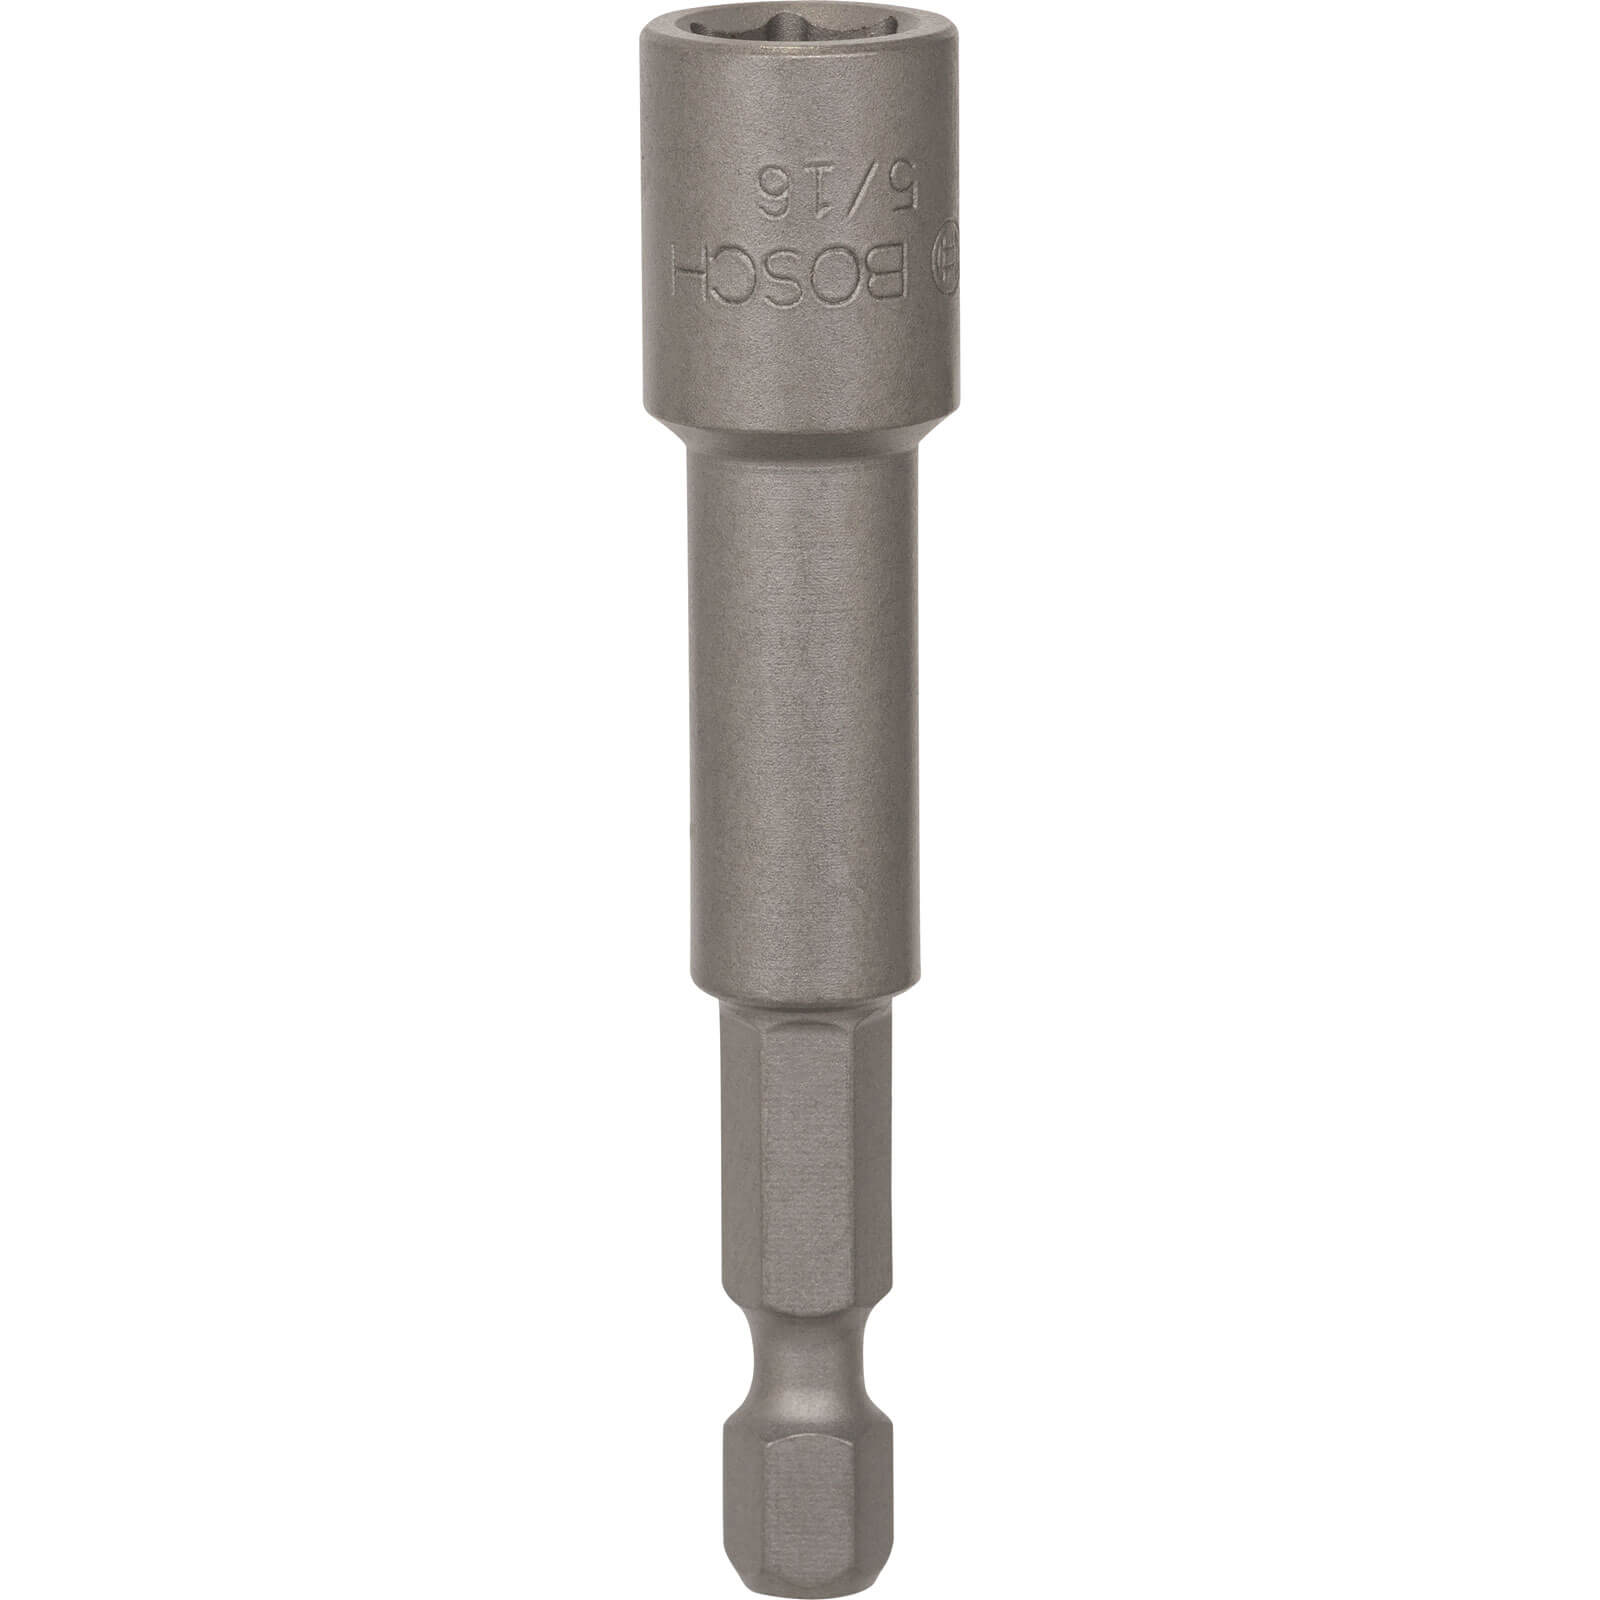 Image of Bosch Permanent Magnet Nut Setter Imperial 5/16"